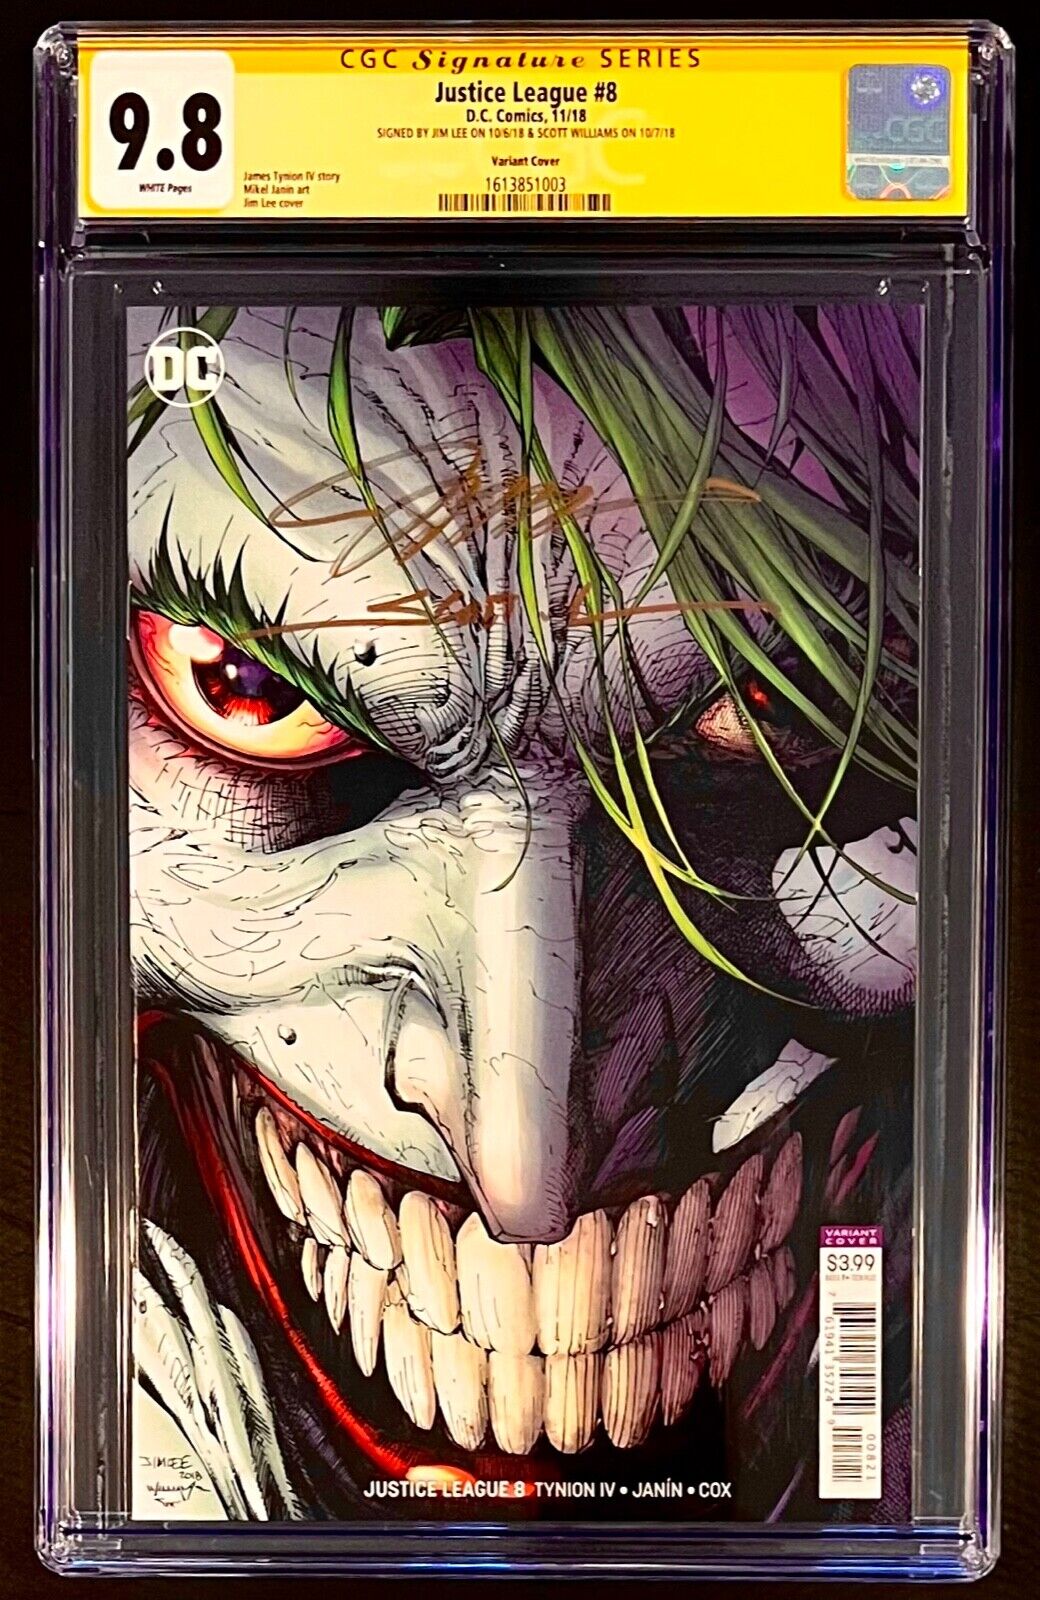 Justice League #8 CGC 9.8 SS Joker Jim Lee Variant Signed by Jim Lee / Williams